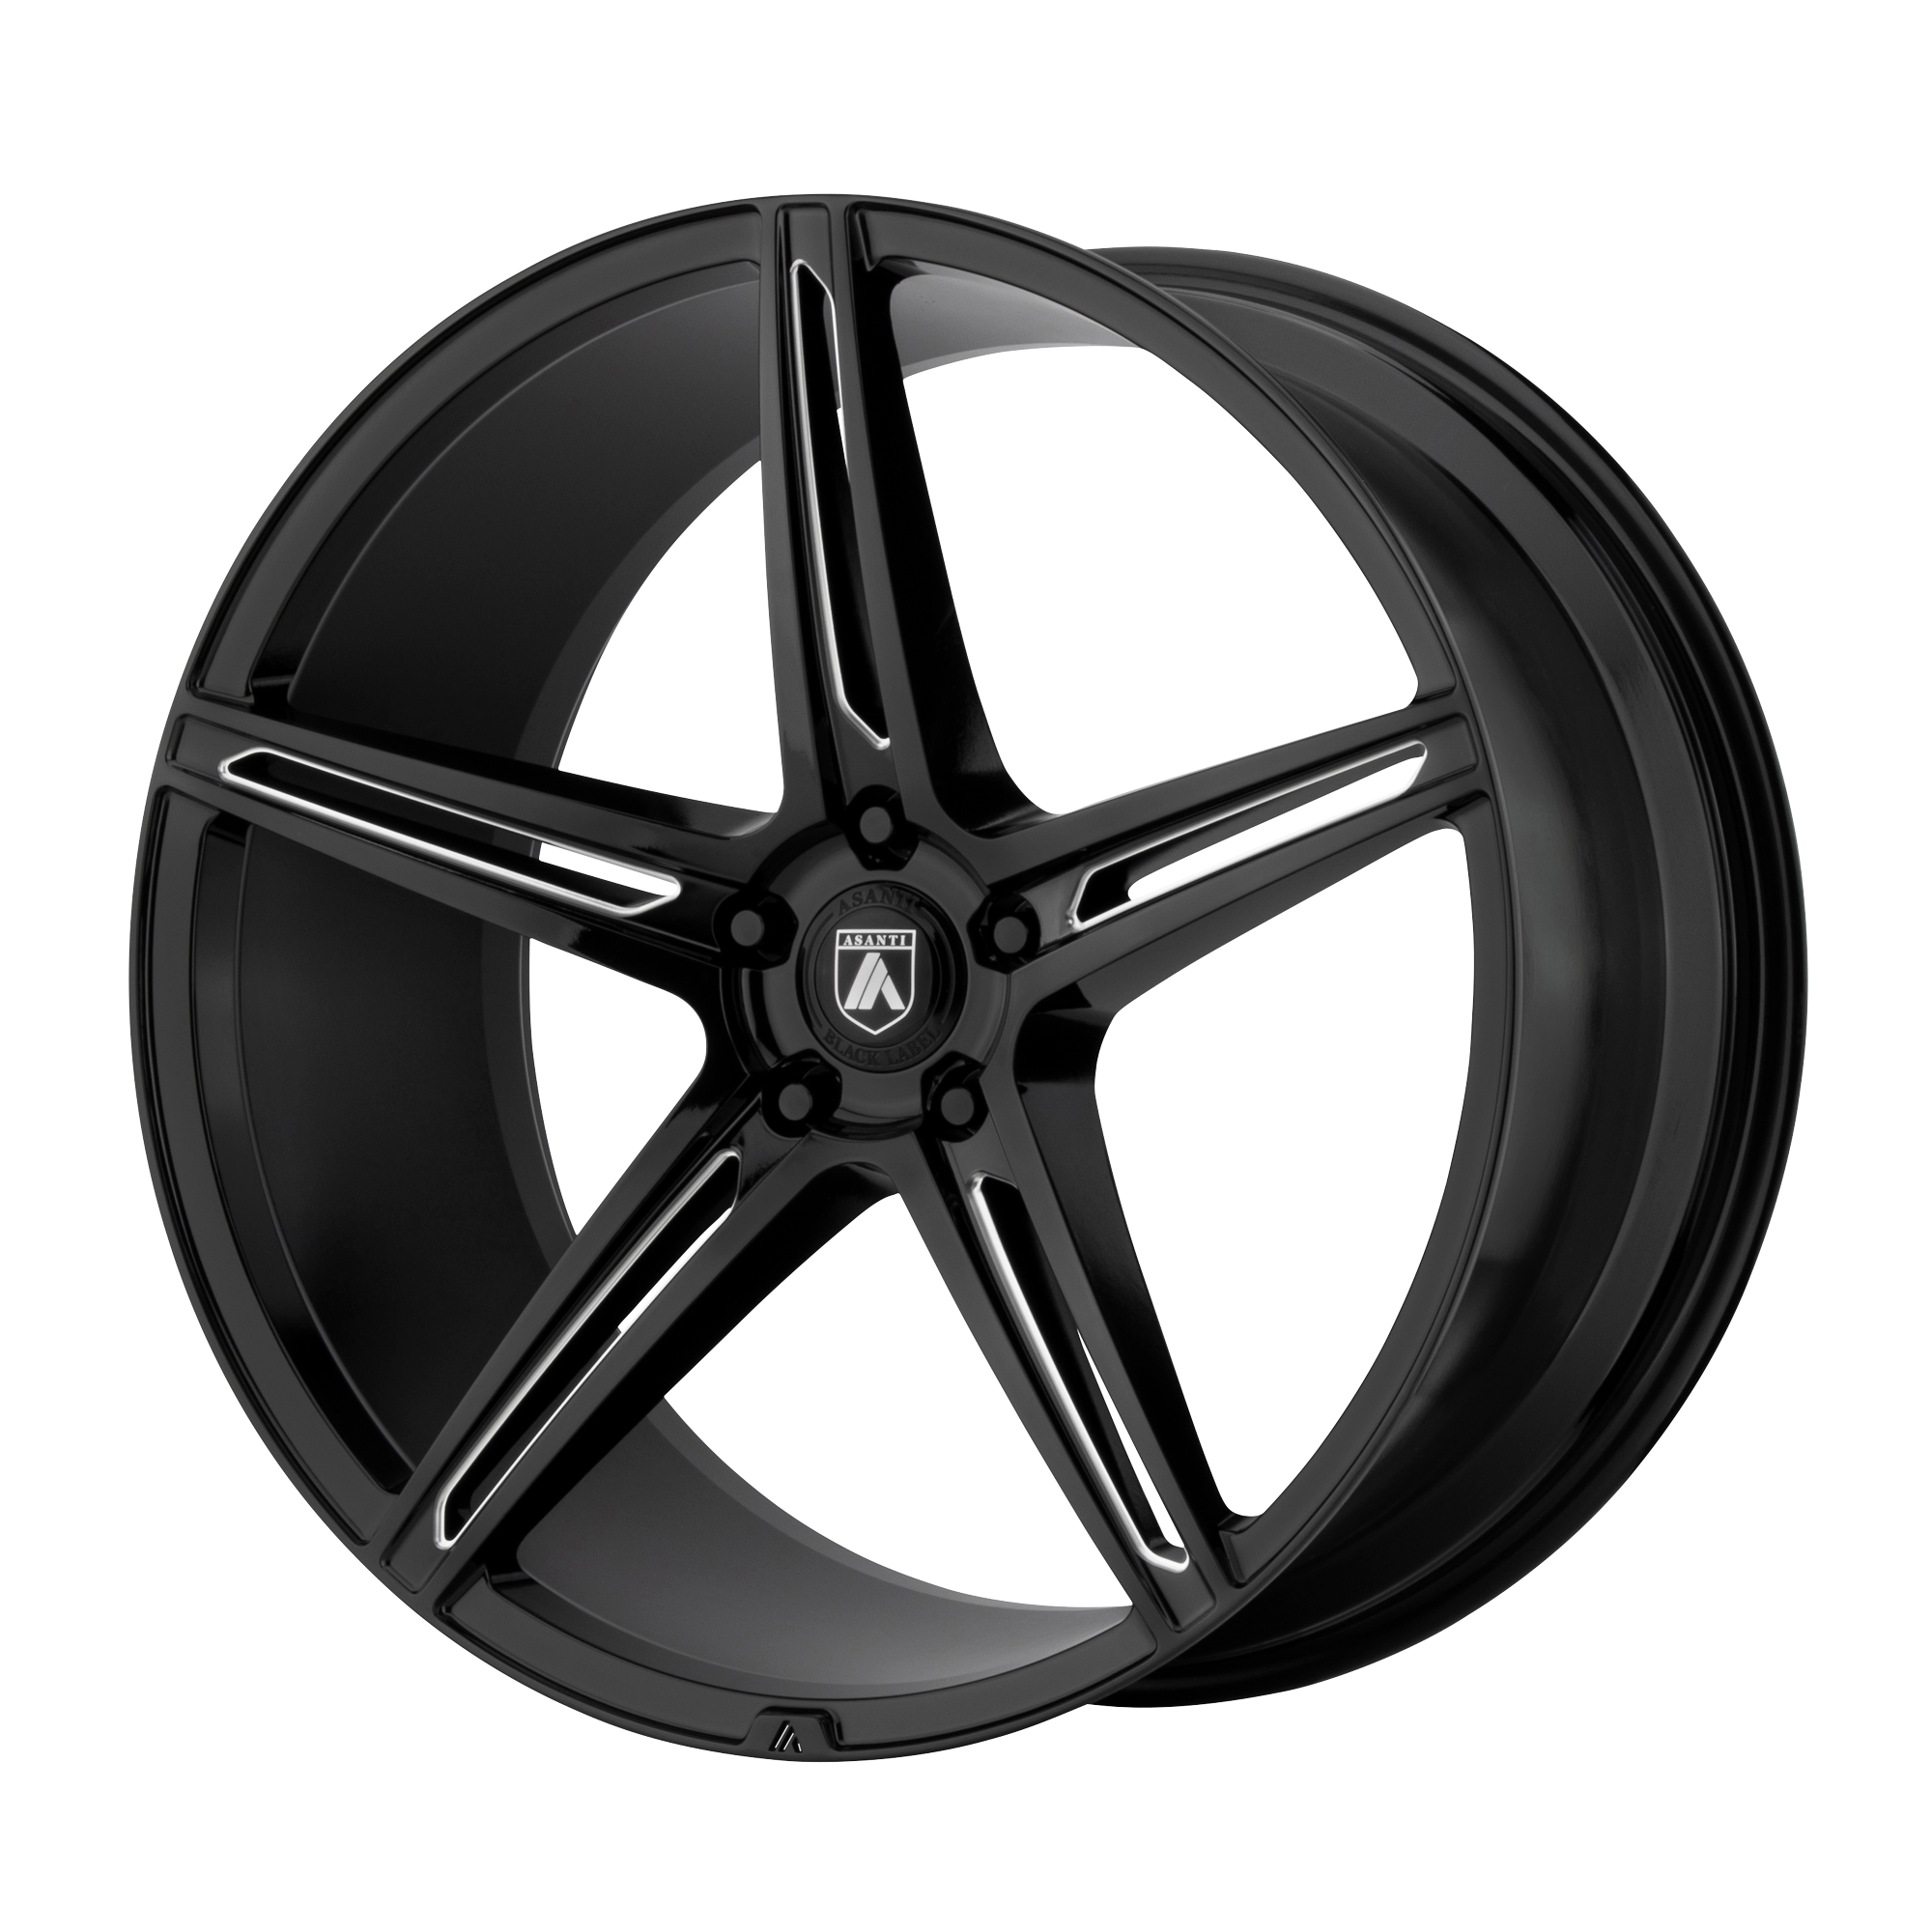 ALPHA 5 20x10.5 Blank GLOSS BLACK MILLED (38 mm) - Tires and Engine Performance